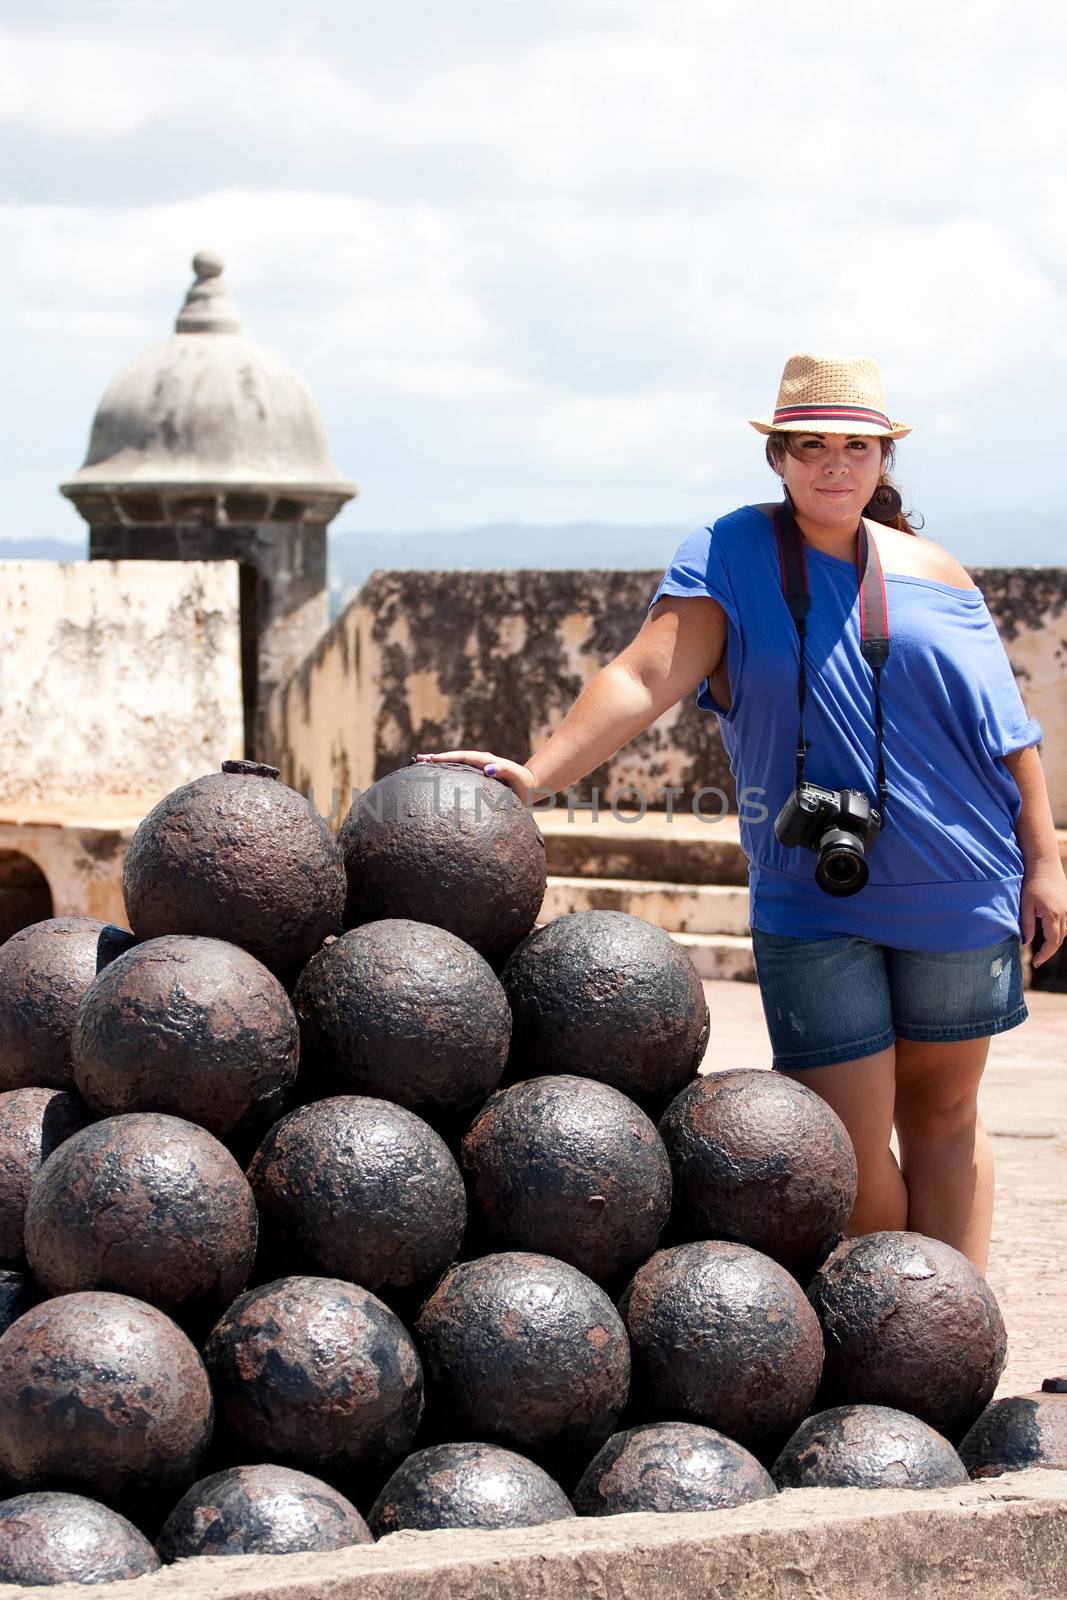 View of the upper interior of El Morro fort located in Old San Juan Puerto Rico.  There is a large pile of canon balls in a pyramid shape.